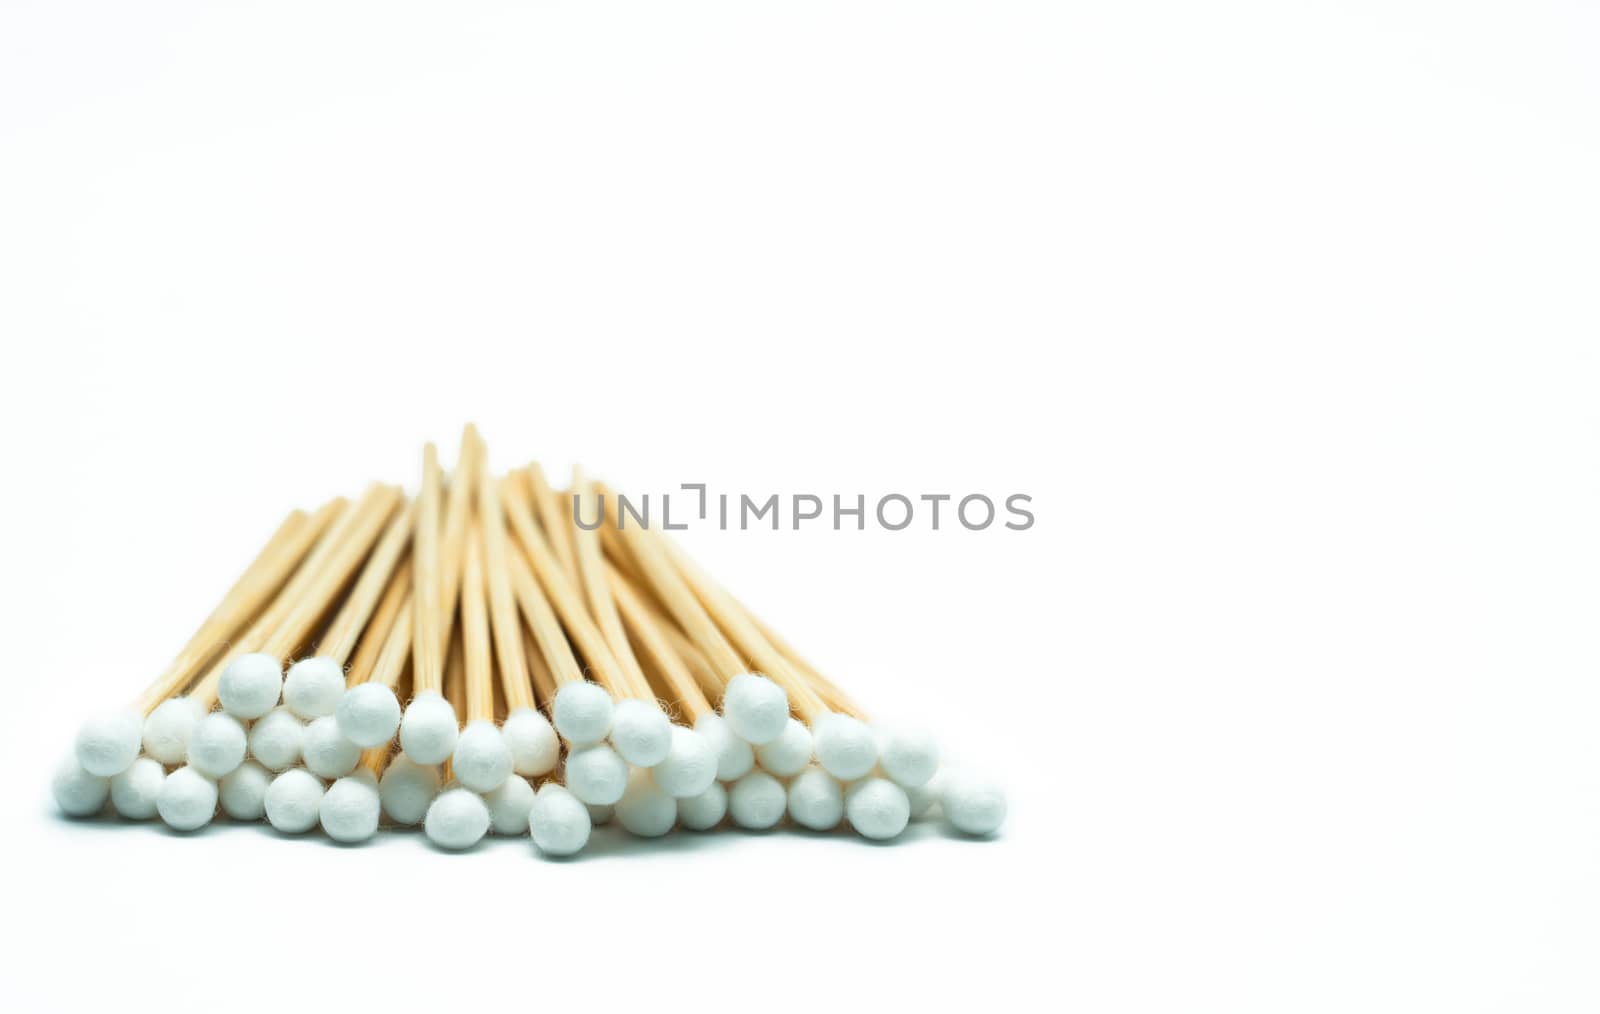 Cotton sticks isolated on white background with copy space. Medical equipment. Wound care supply. by Fahroni